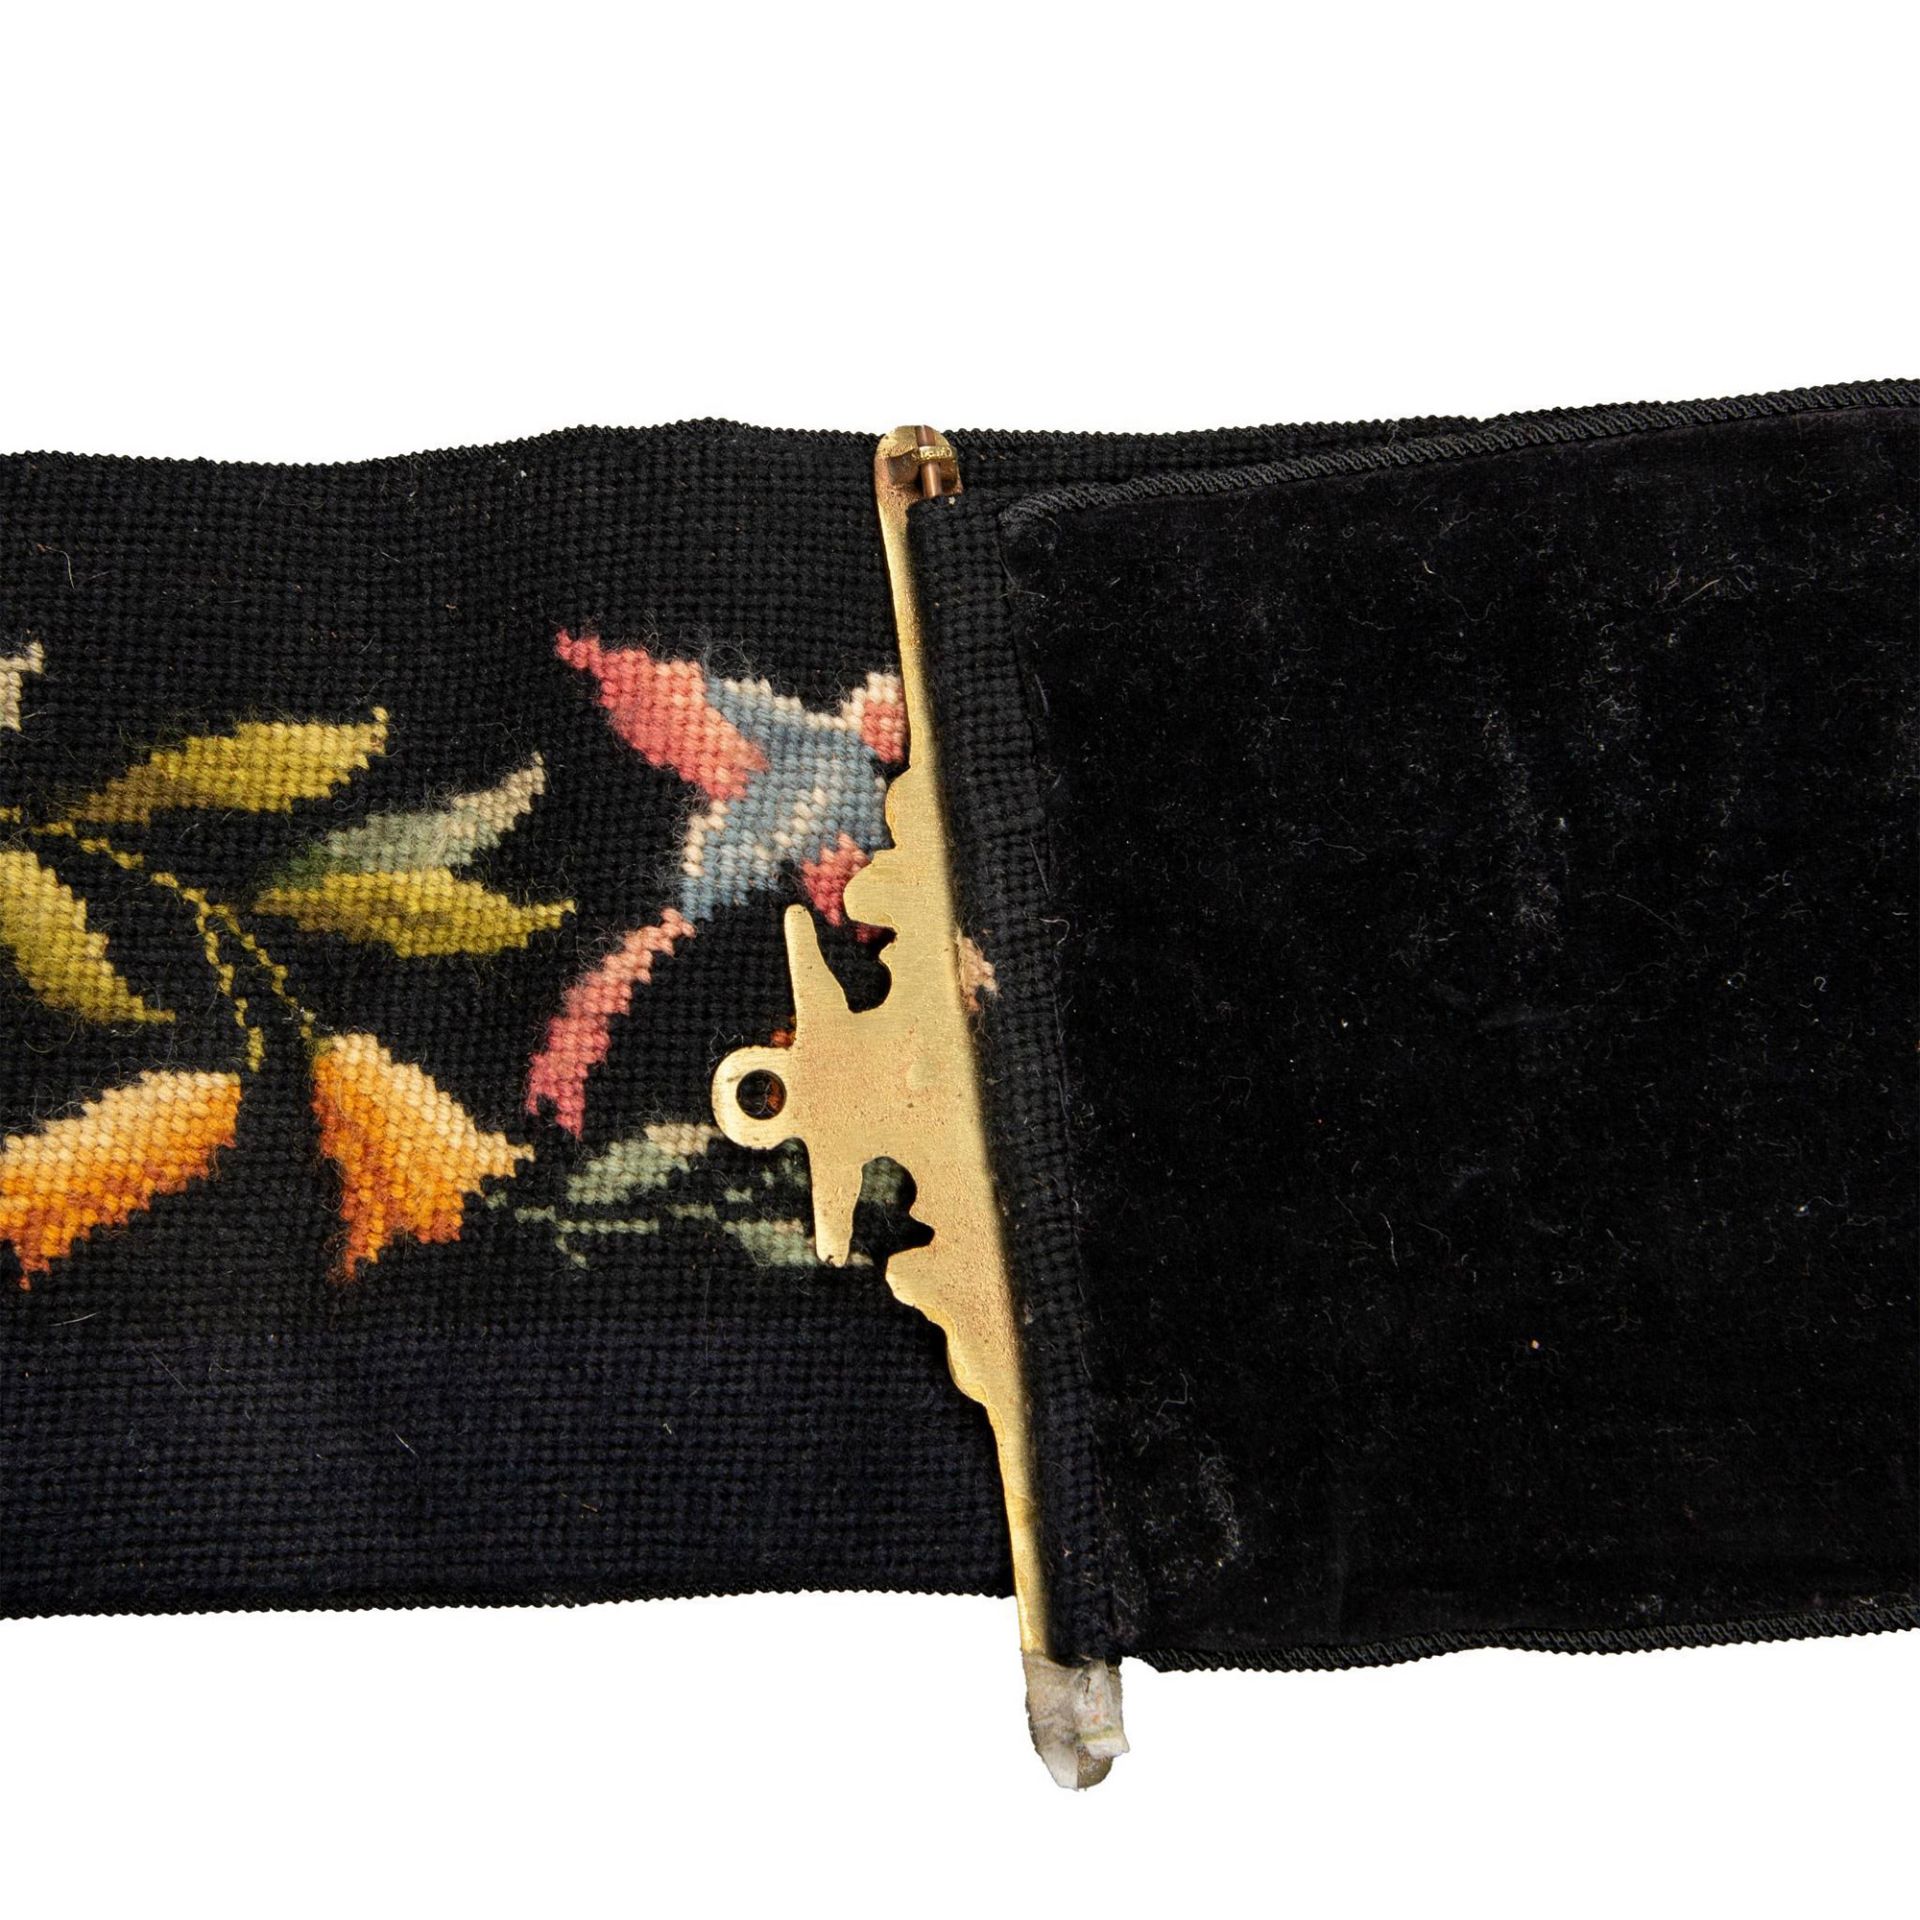 Embroidered Floral Tapestry - Image 4 of 4